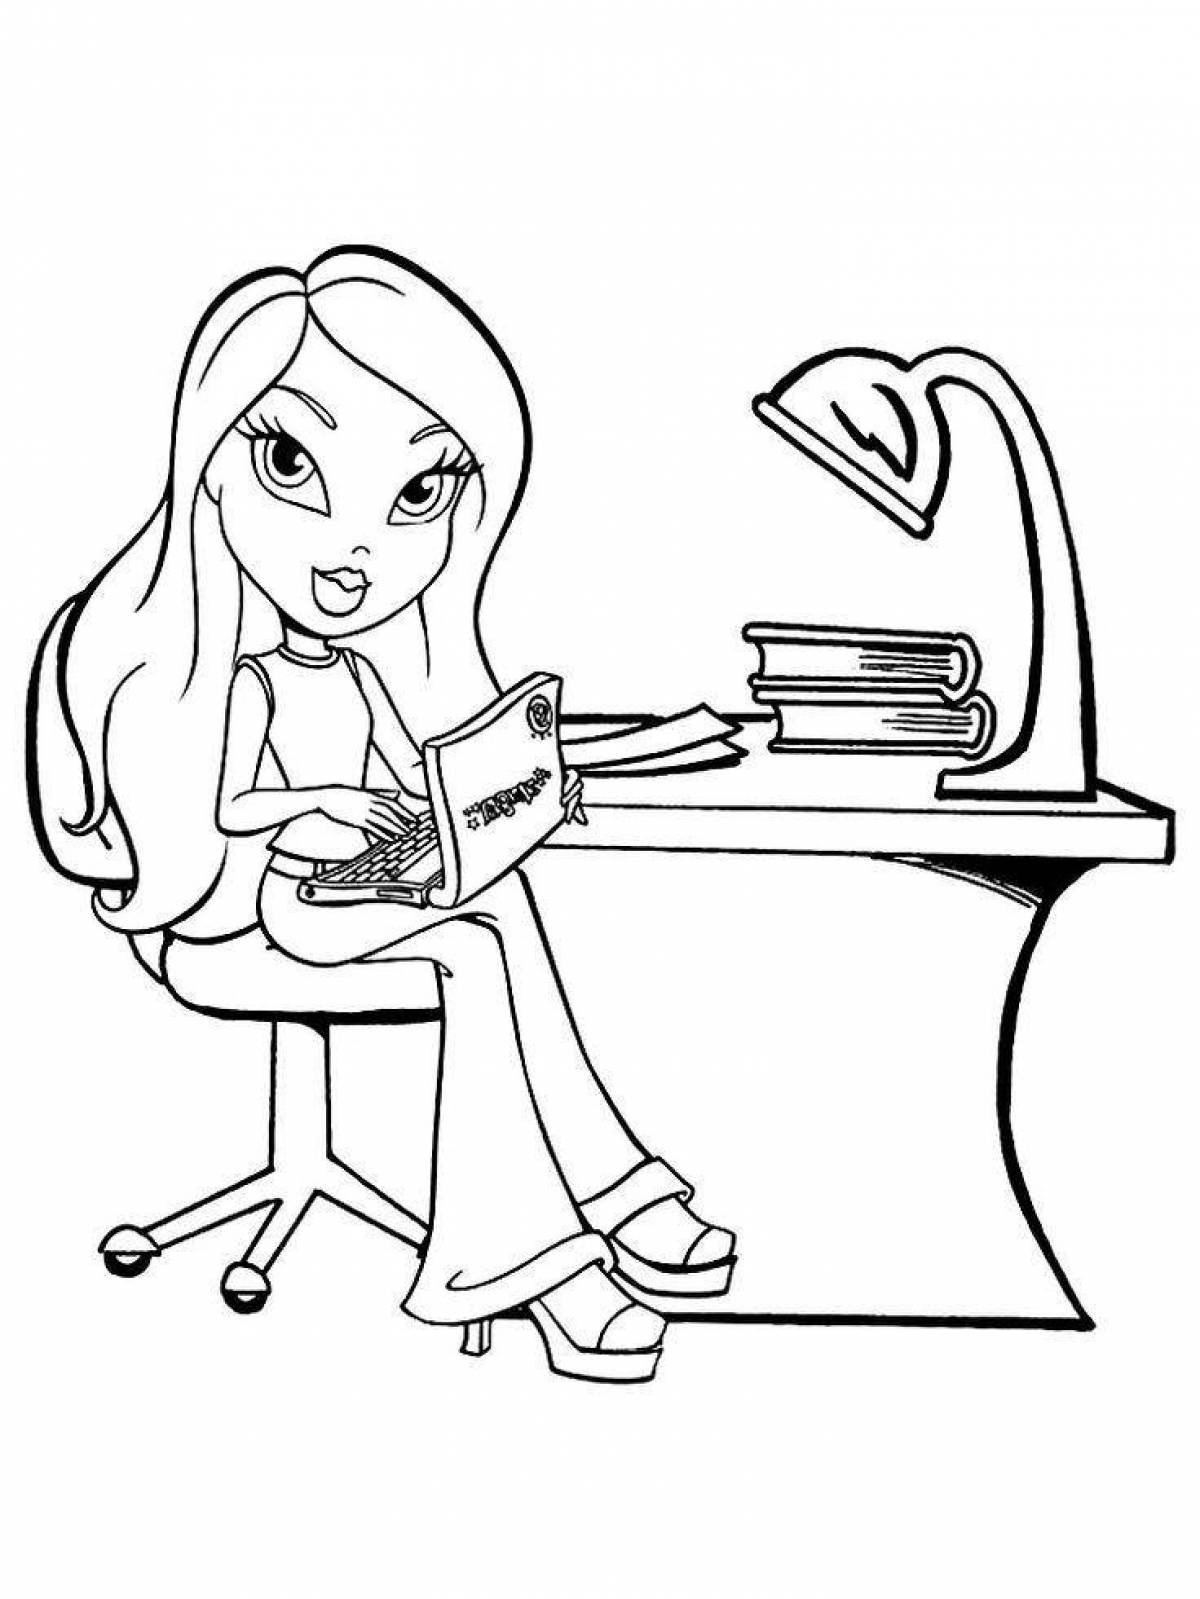 Colorful illustration coloring page create coloring page